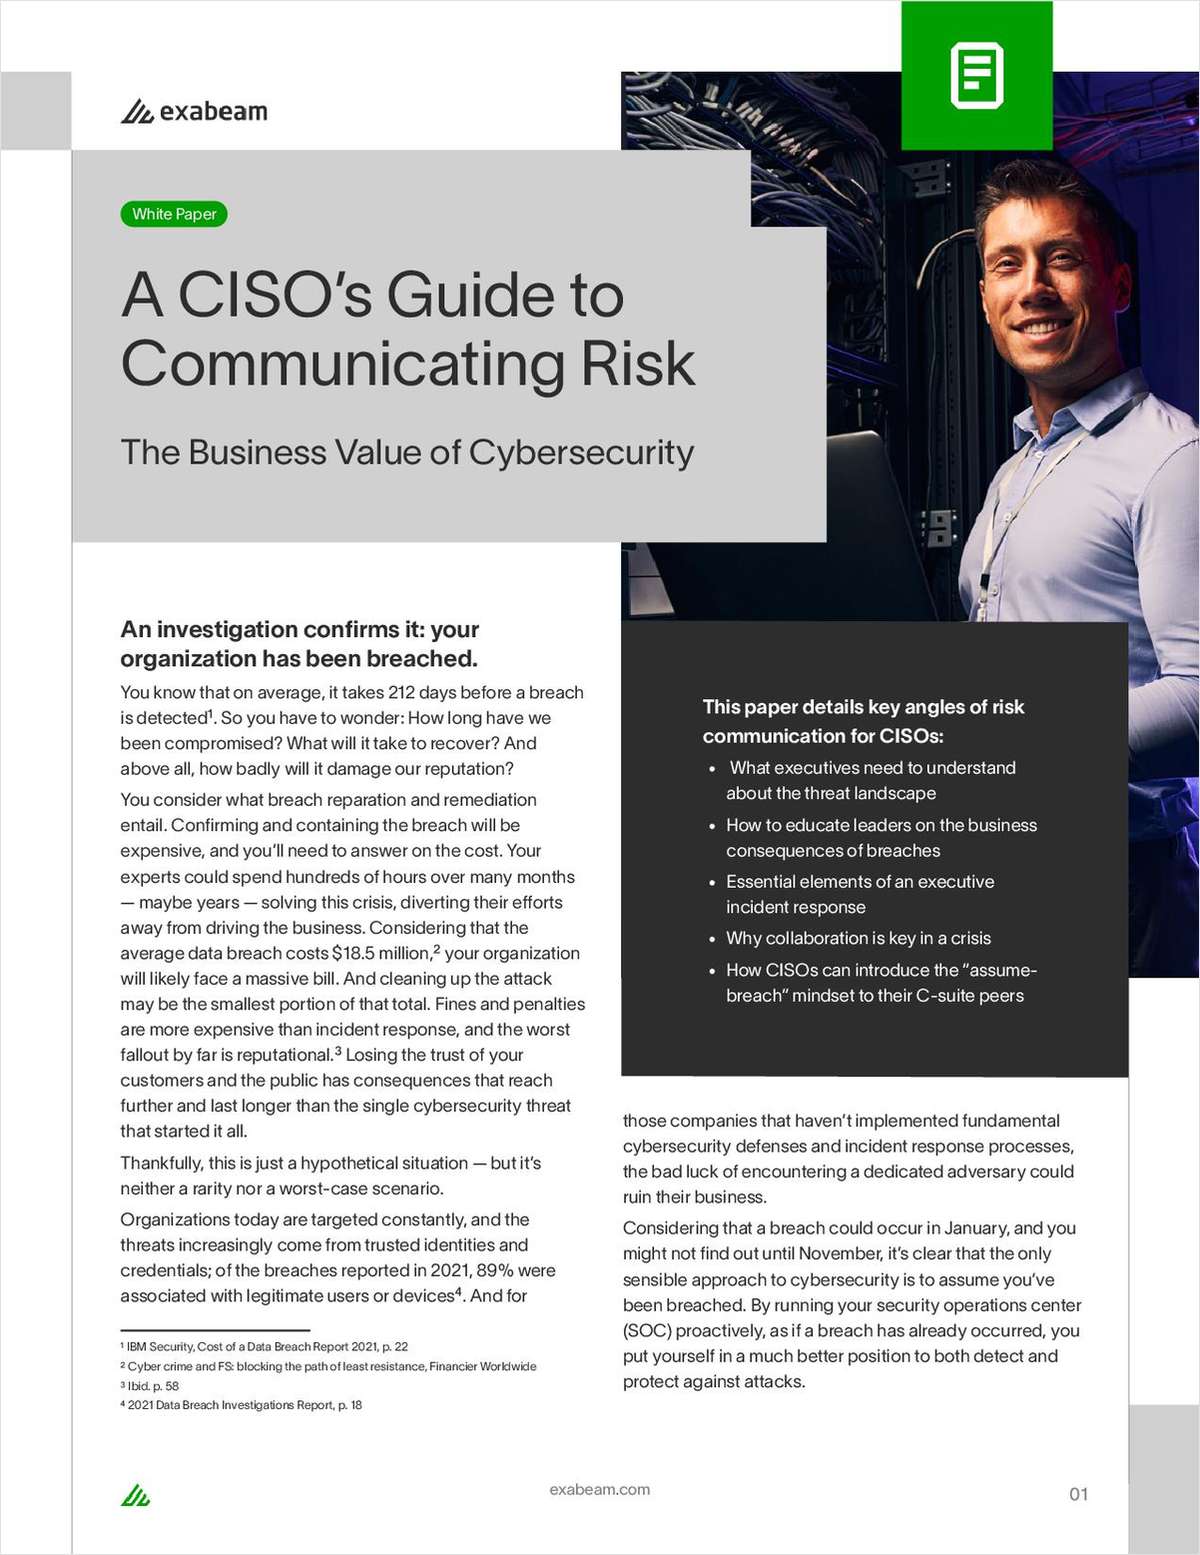 A CISO's Guide to Communicating Risk